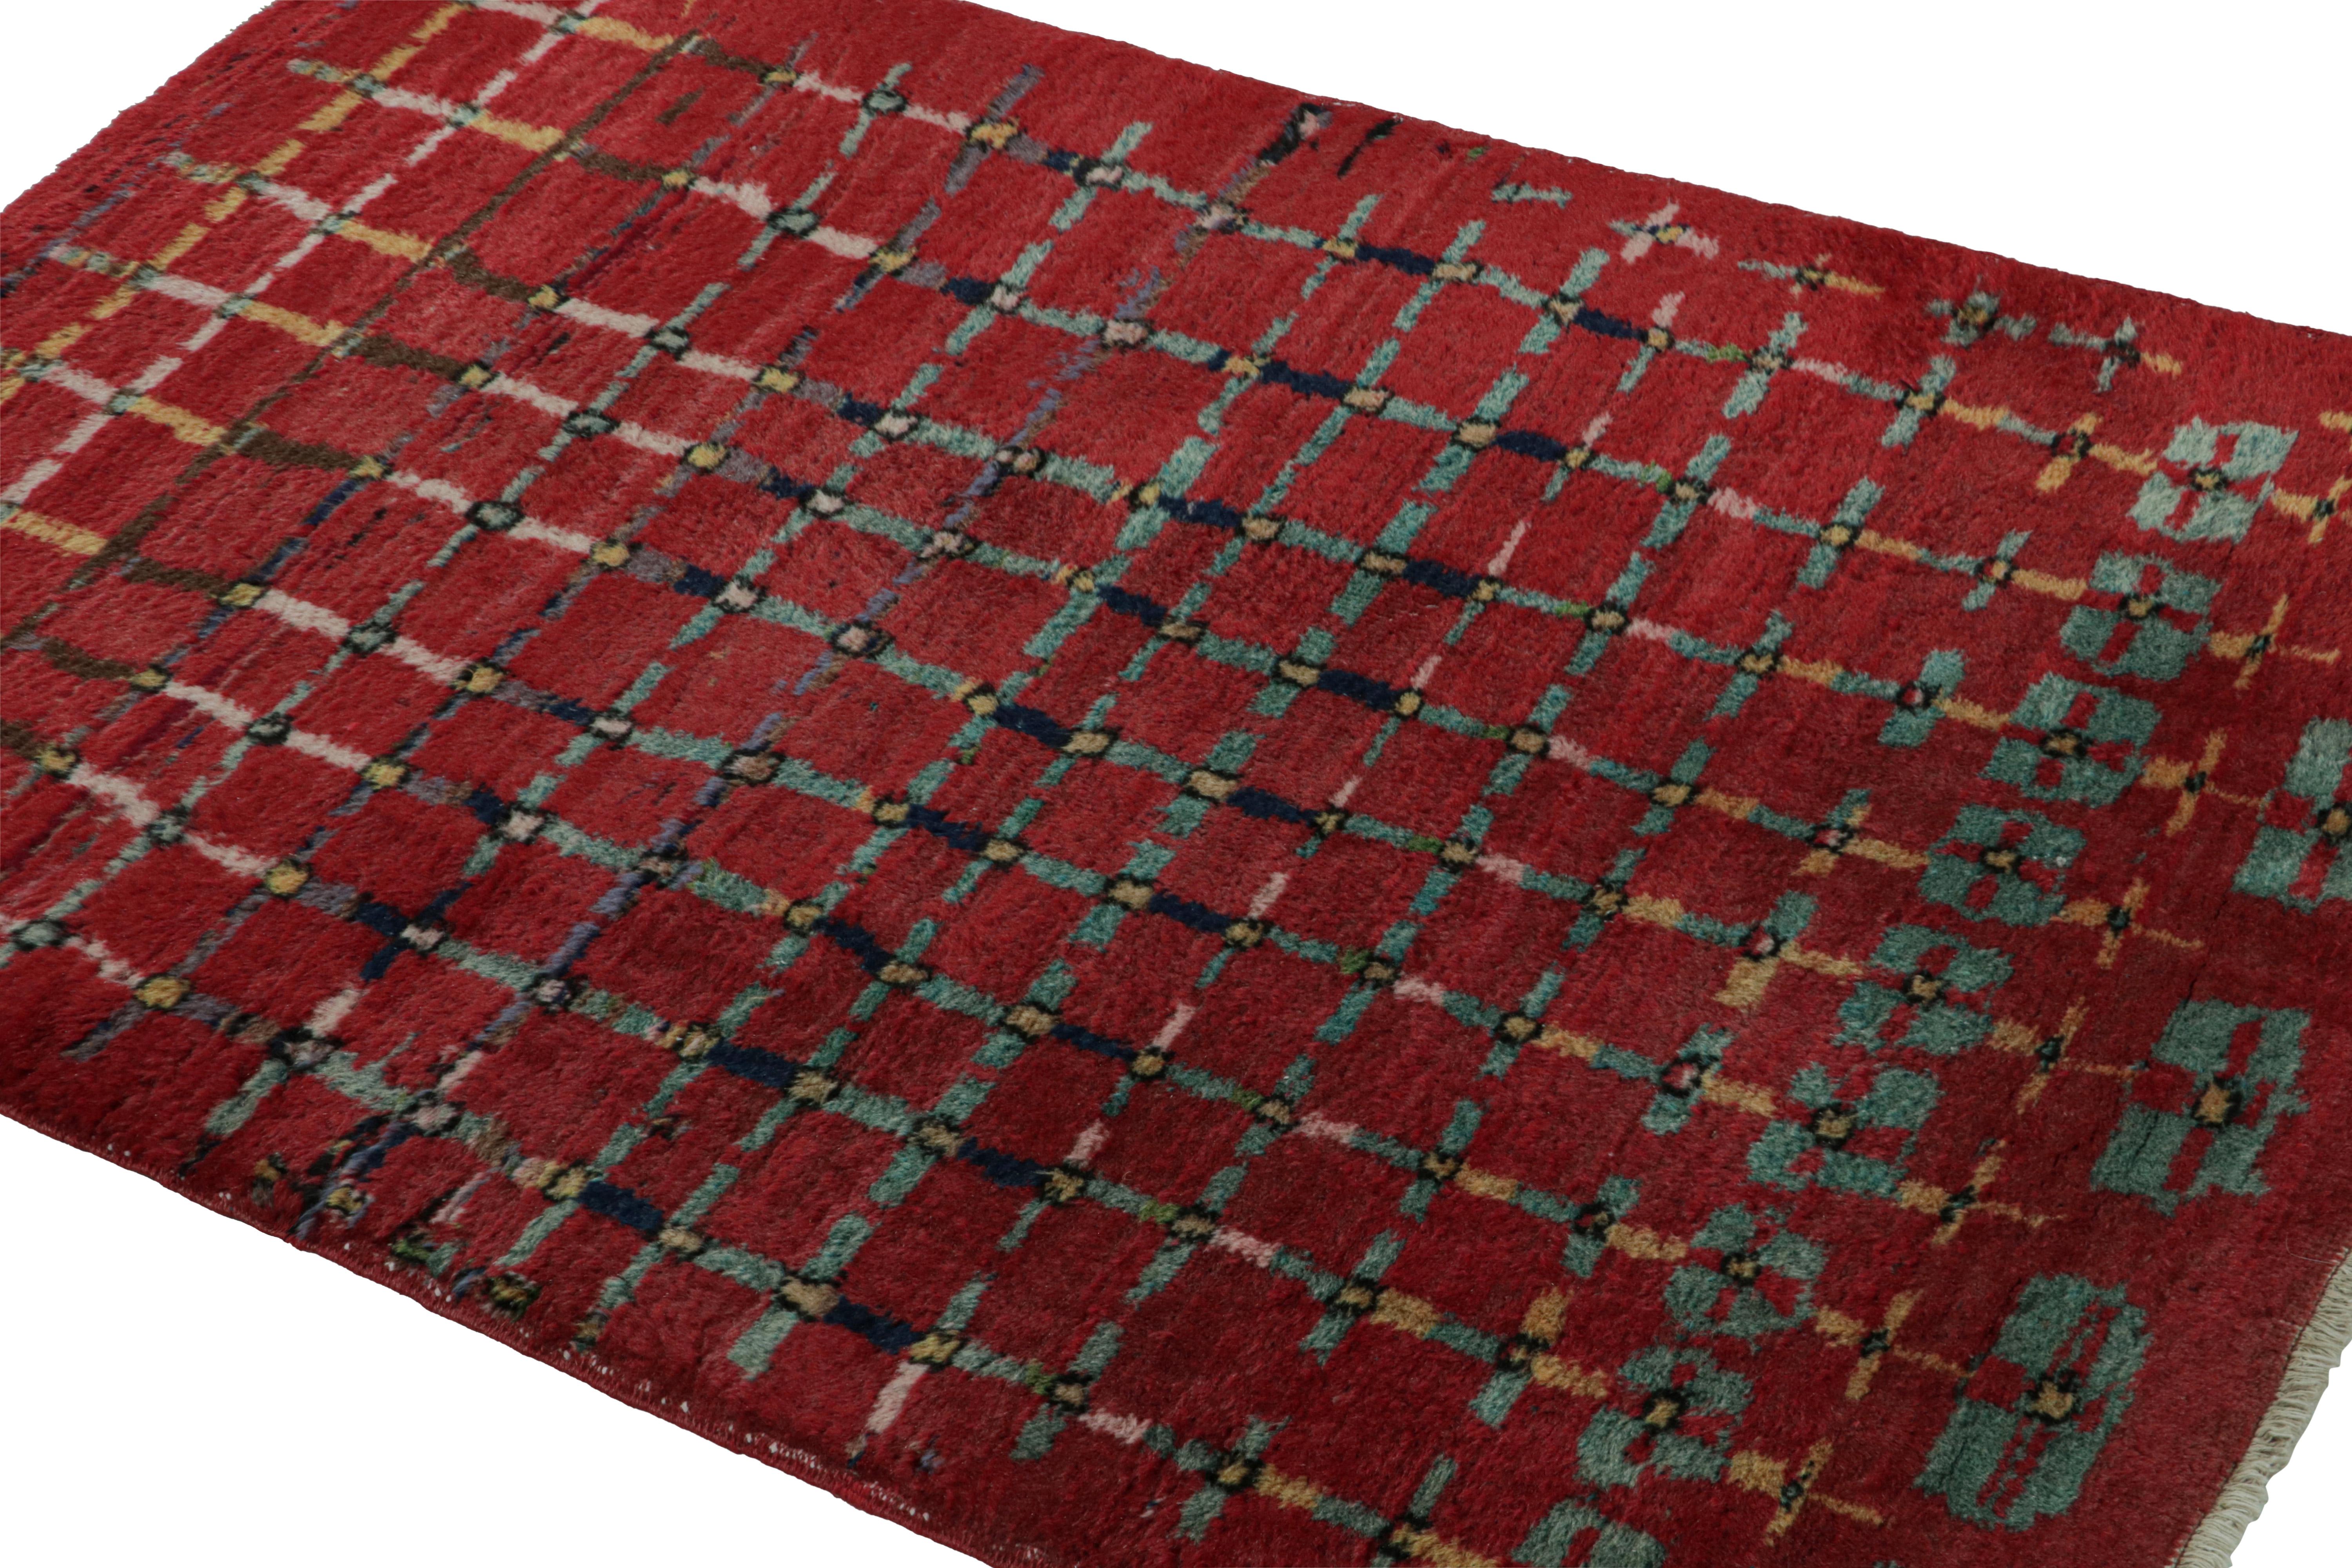 Hand-knotted in wool, circa 1960 - 1970, this 3x6 vintage Zeki Müren Art Deco rug is an exciting curation from Rug & Kilim. Its design features a rich red field with blue playful geometric patterns across the surface. 

On the Design: 

With a rich